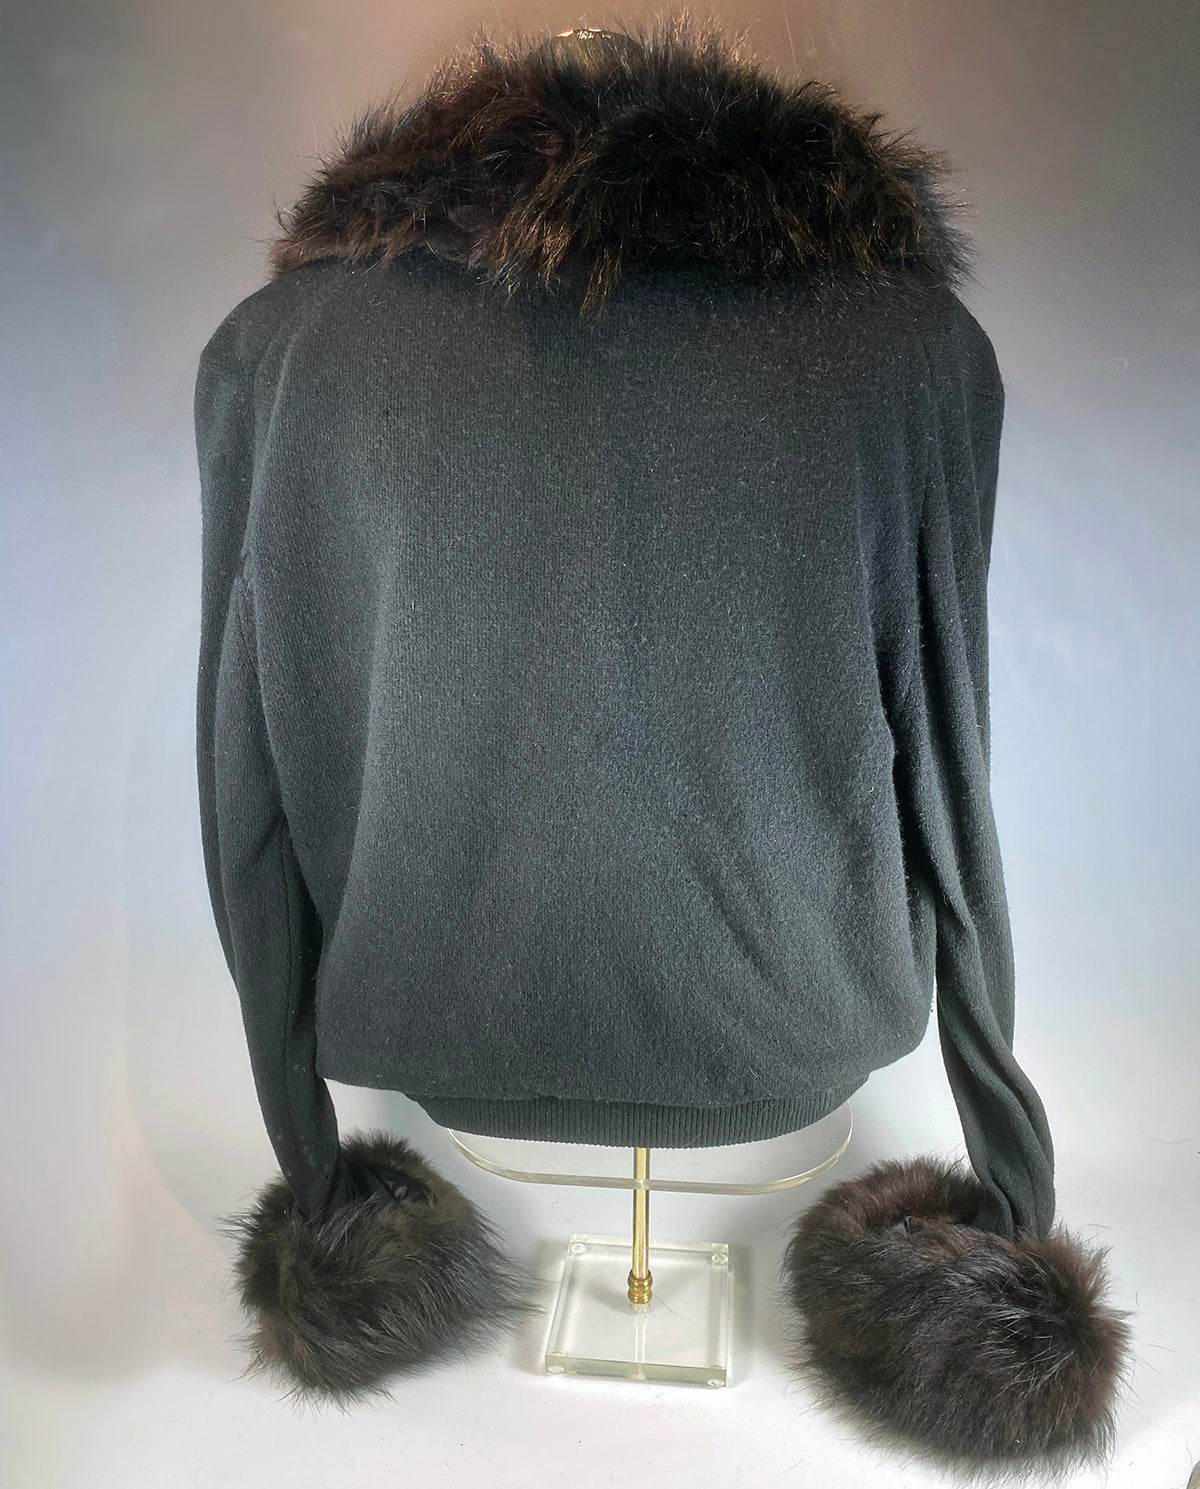 Fine Vintage 1950s Russian Wolf Fur Collar and Cuffs, Cashmere Cardigan Sweater